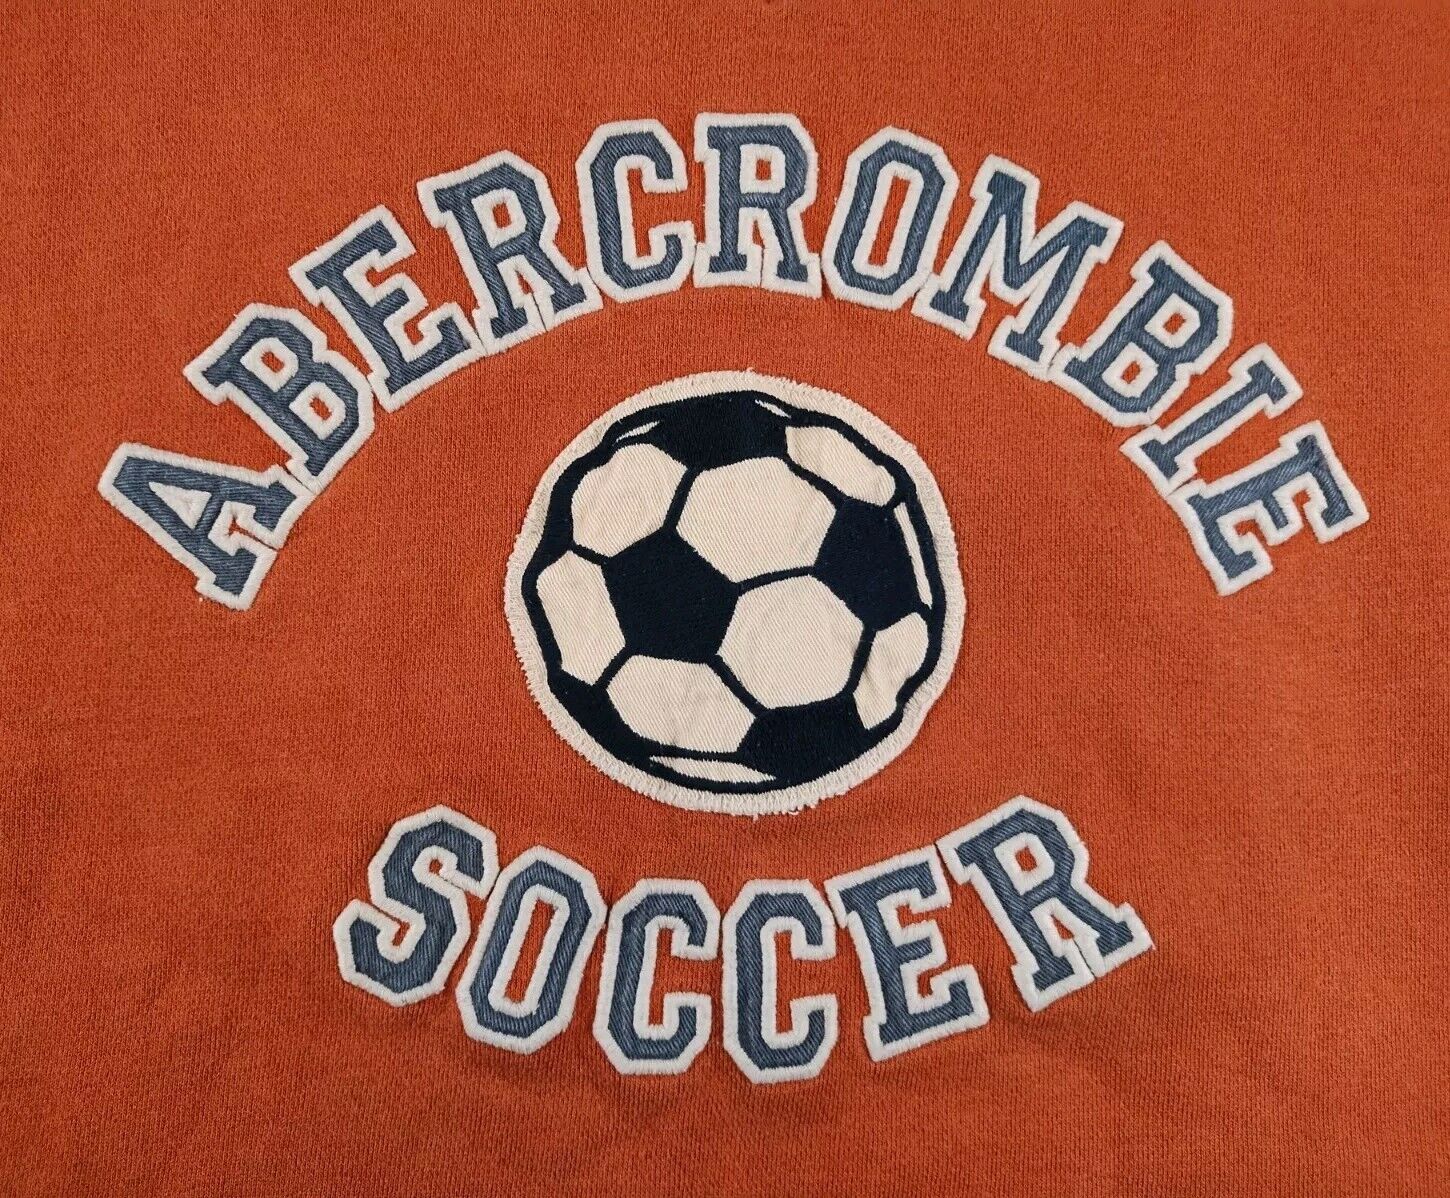 Abercrombie & Fitch Sweatshirt Soccer Youth Lg Orange Soccer Logo Embroidered